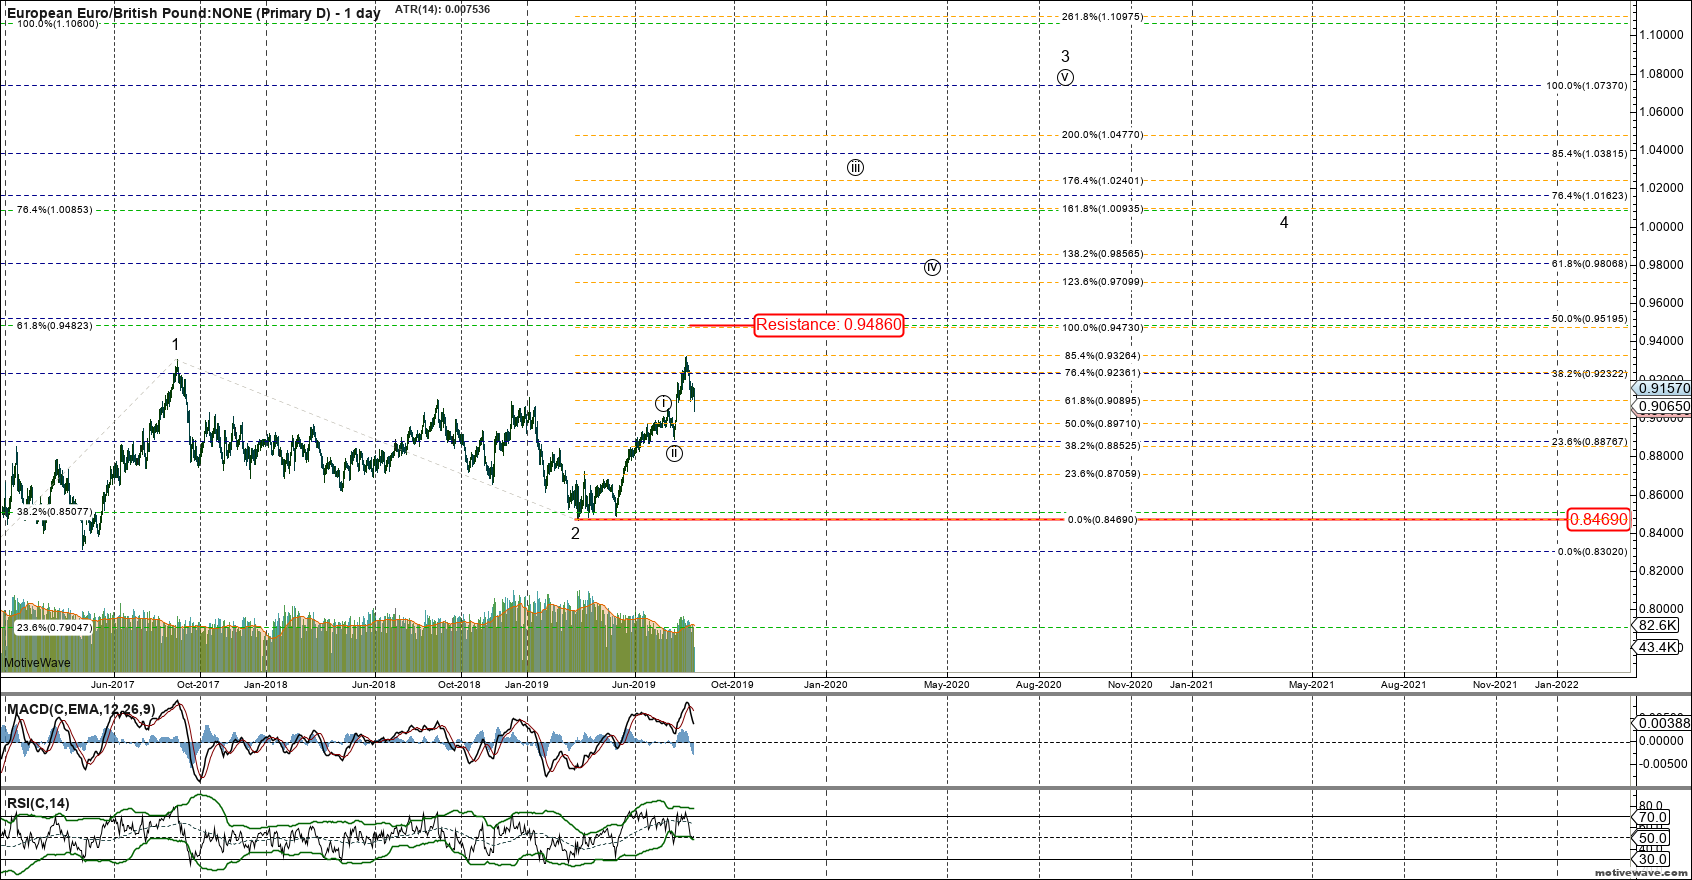 BaseCase - EURGBP= - Primary D - Aug-22 0921 AM (1 day)